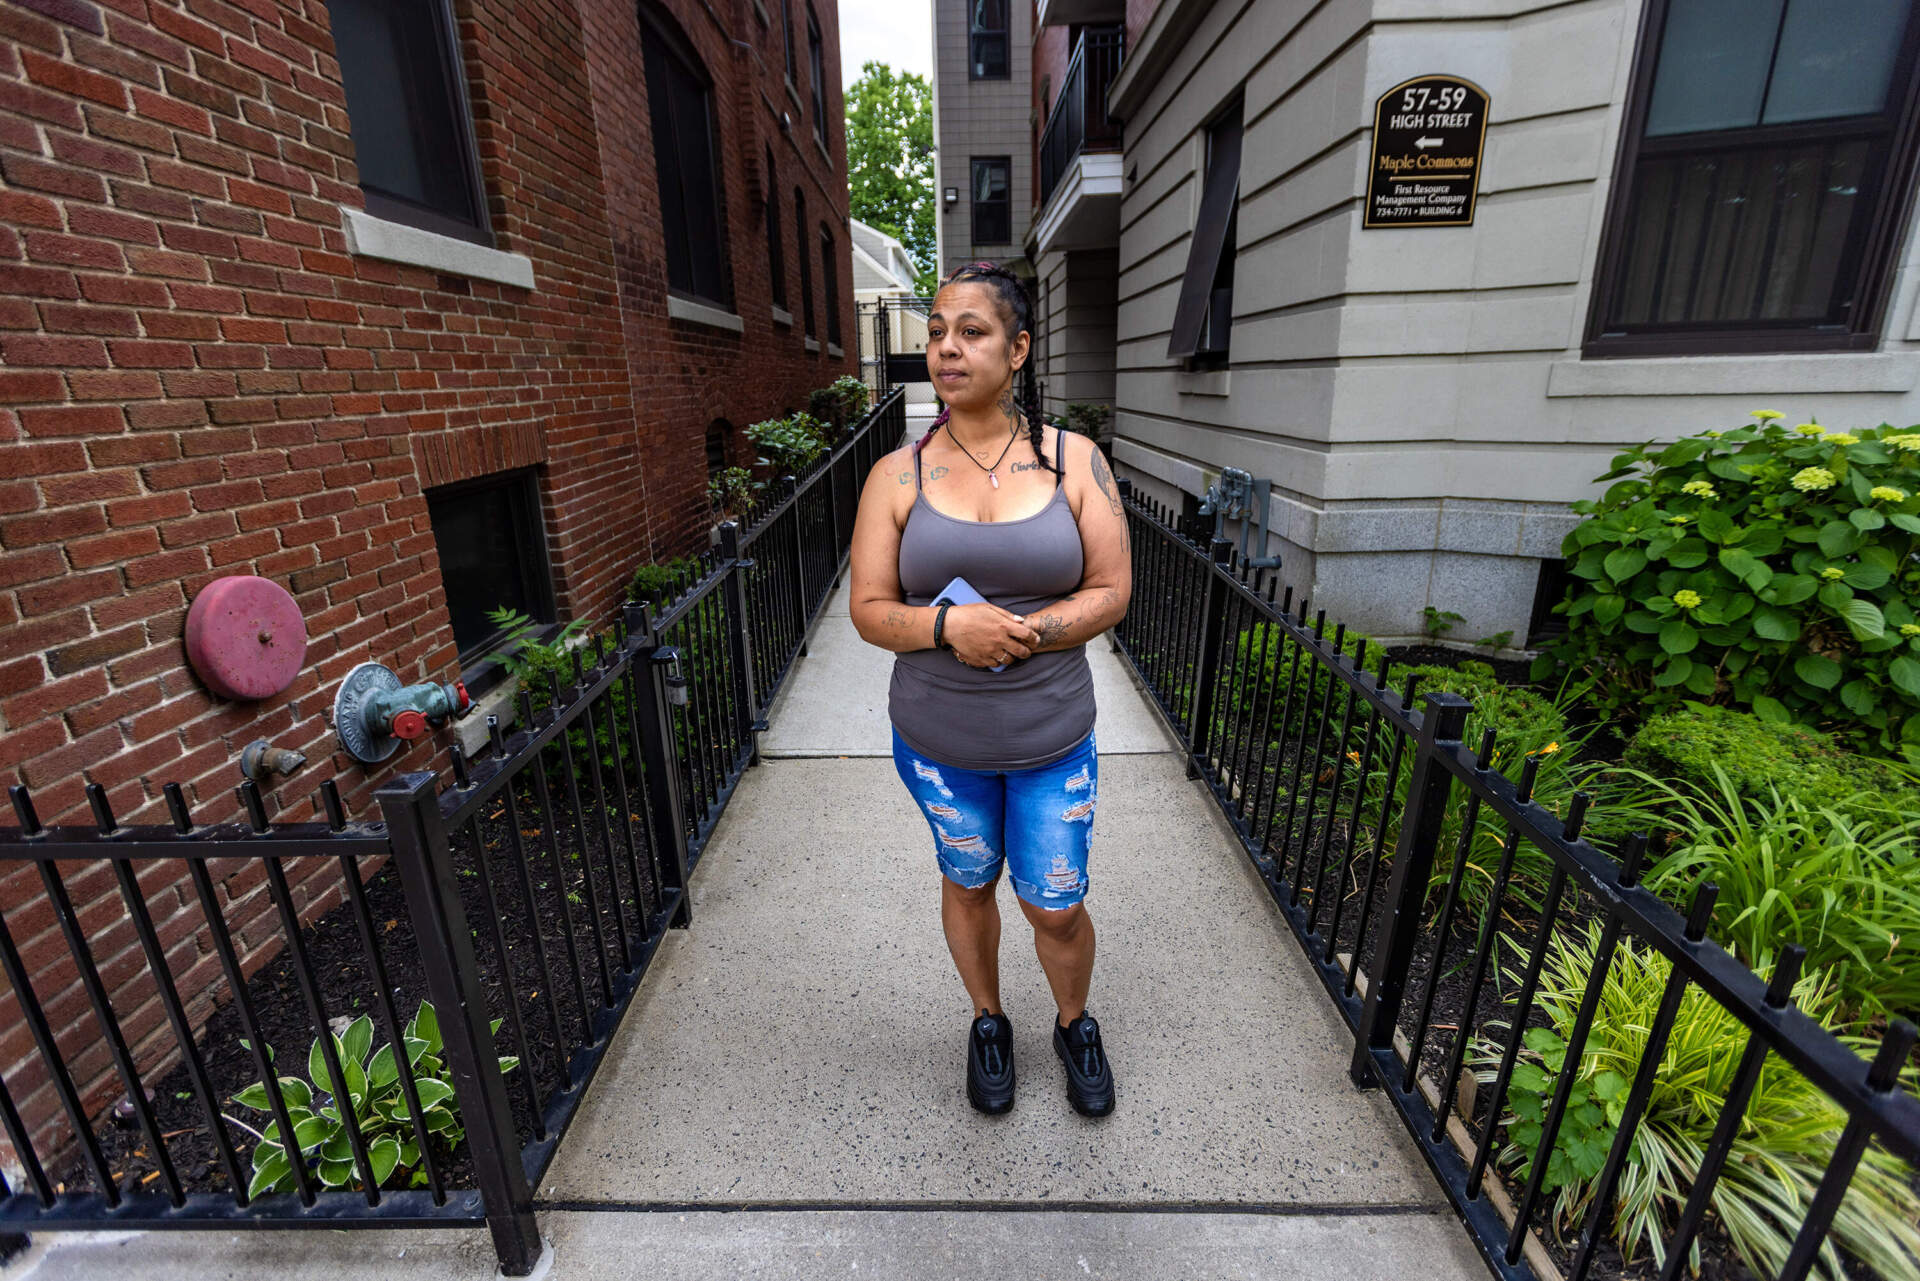 Celinda Cloud looks towards the parking lot across the street from her apartment building, where she rescued a person from overdosing using naloxone from the box on High Street in Springfield. (Jesse Costa/WBUR)